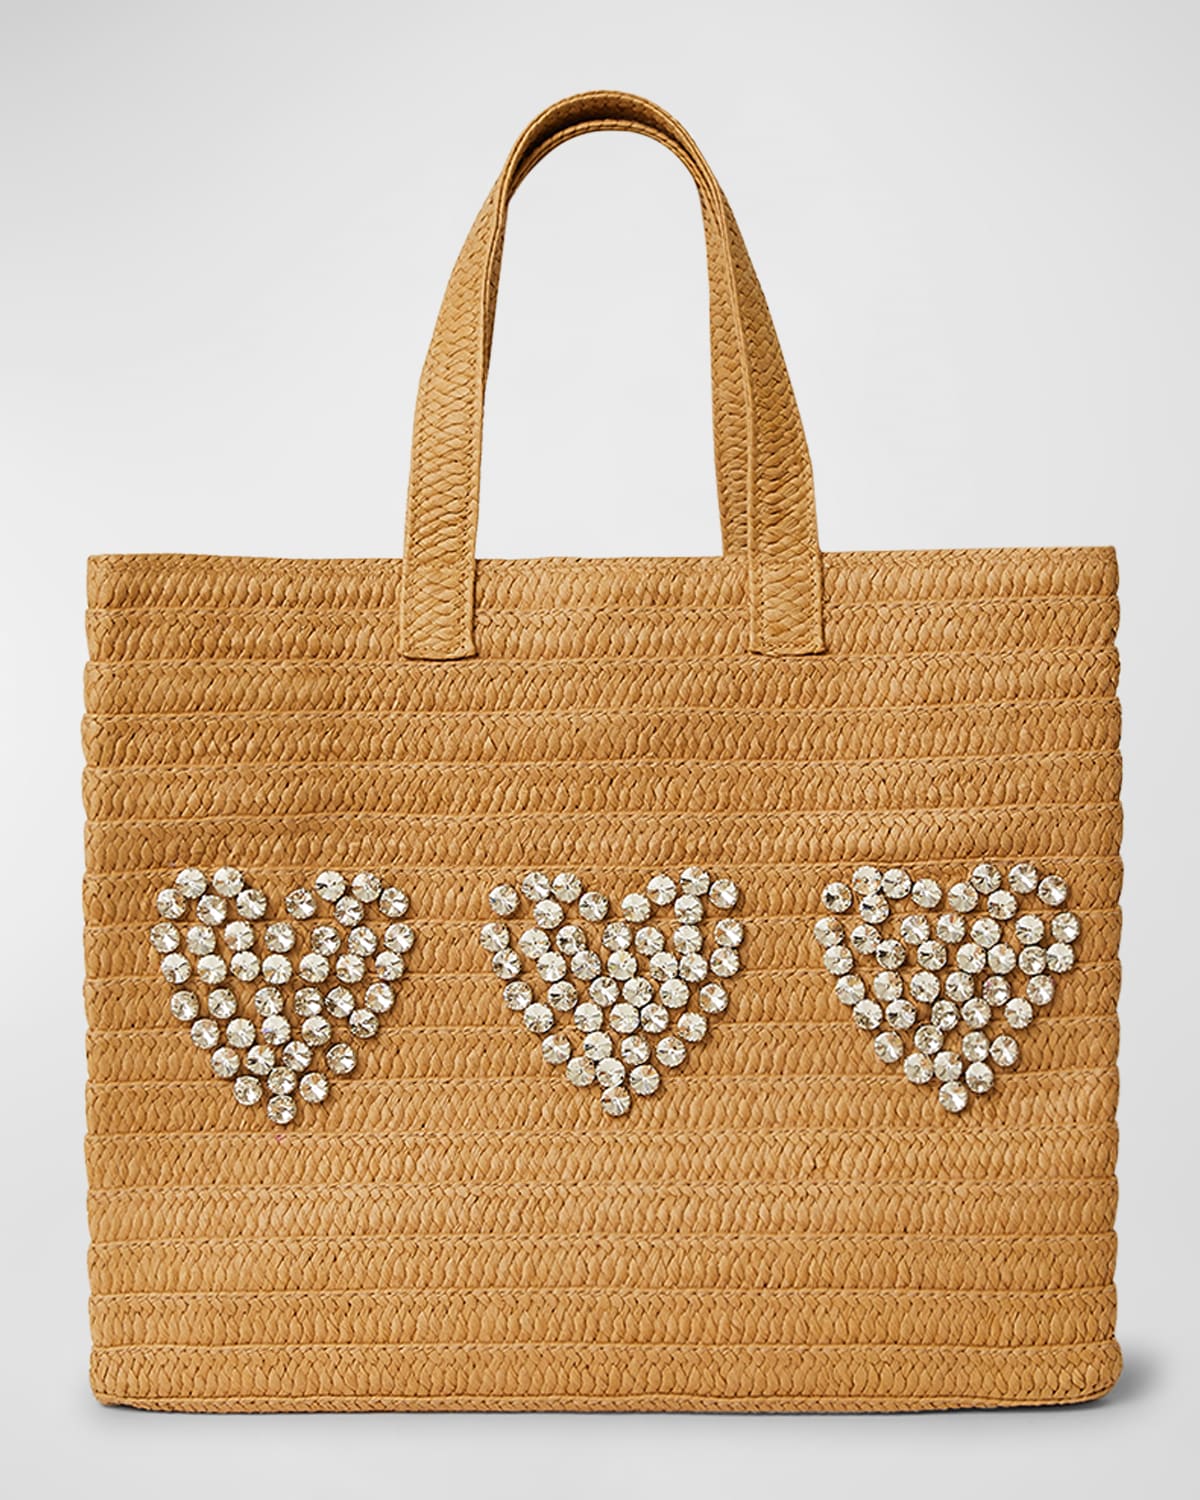 Crystal Heart Straw Tote Bag